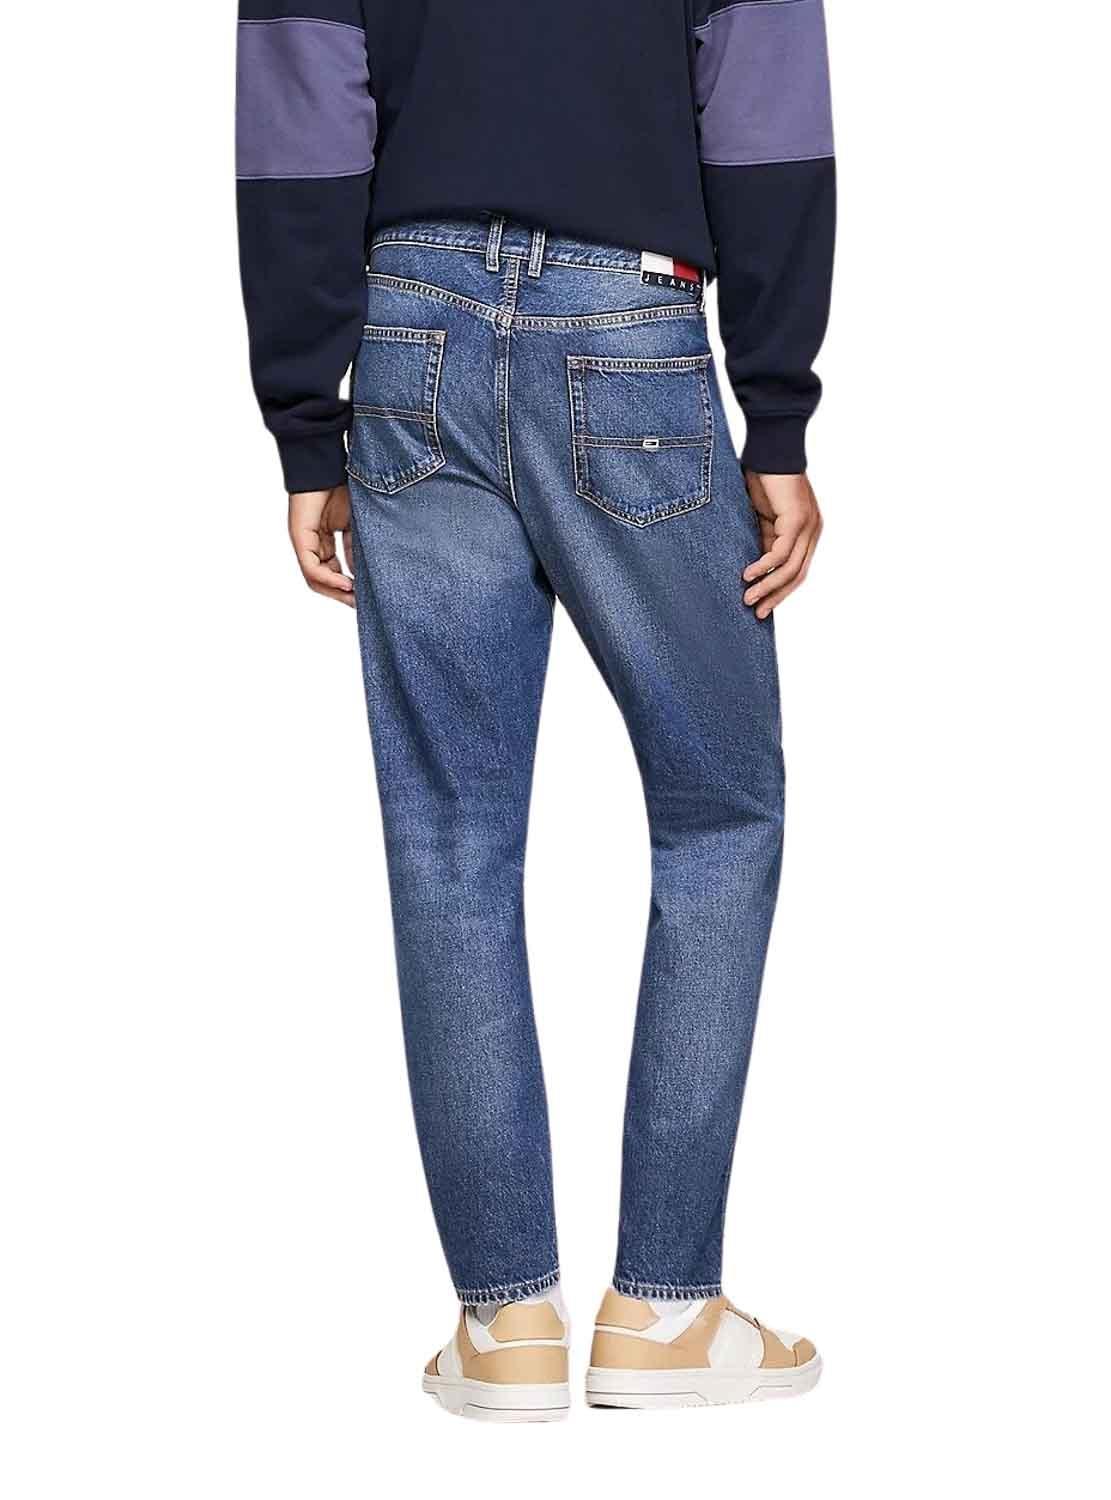 Pantaloni Jeans Tommy Jeans Isaac Taperosso Uomo